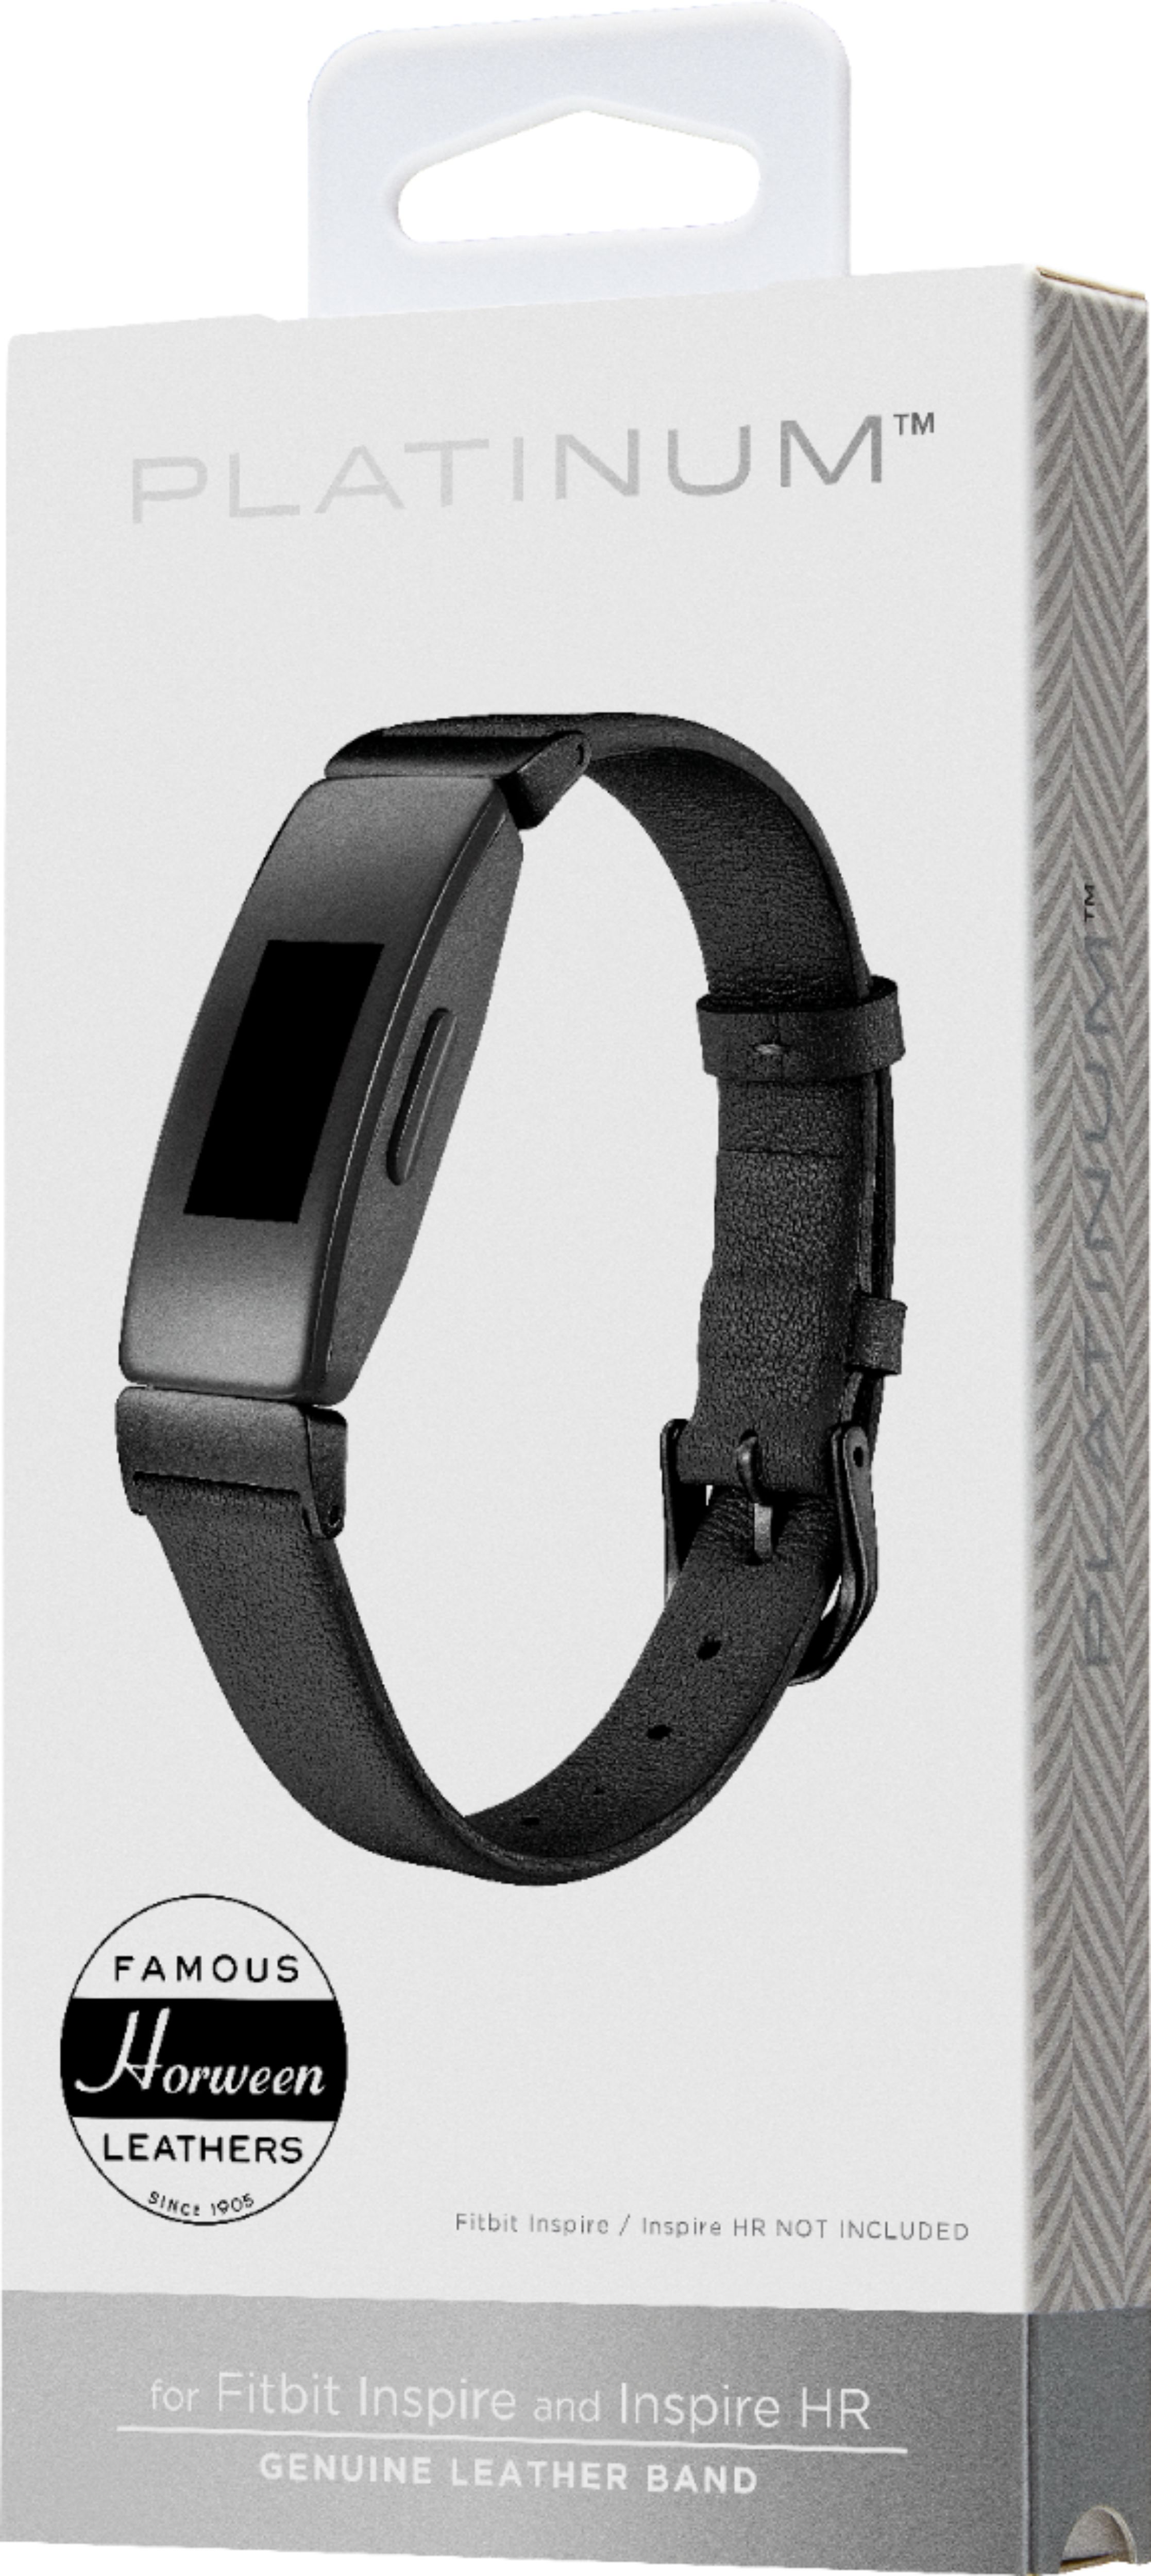 Best Buy: Platinum™ Horween Leather Band for Fitbit Inspire and